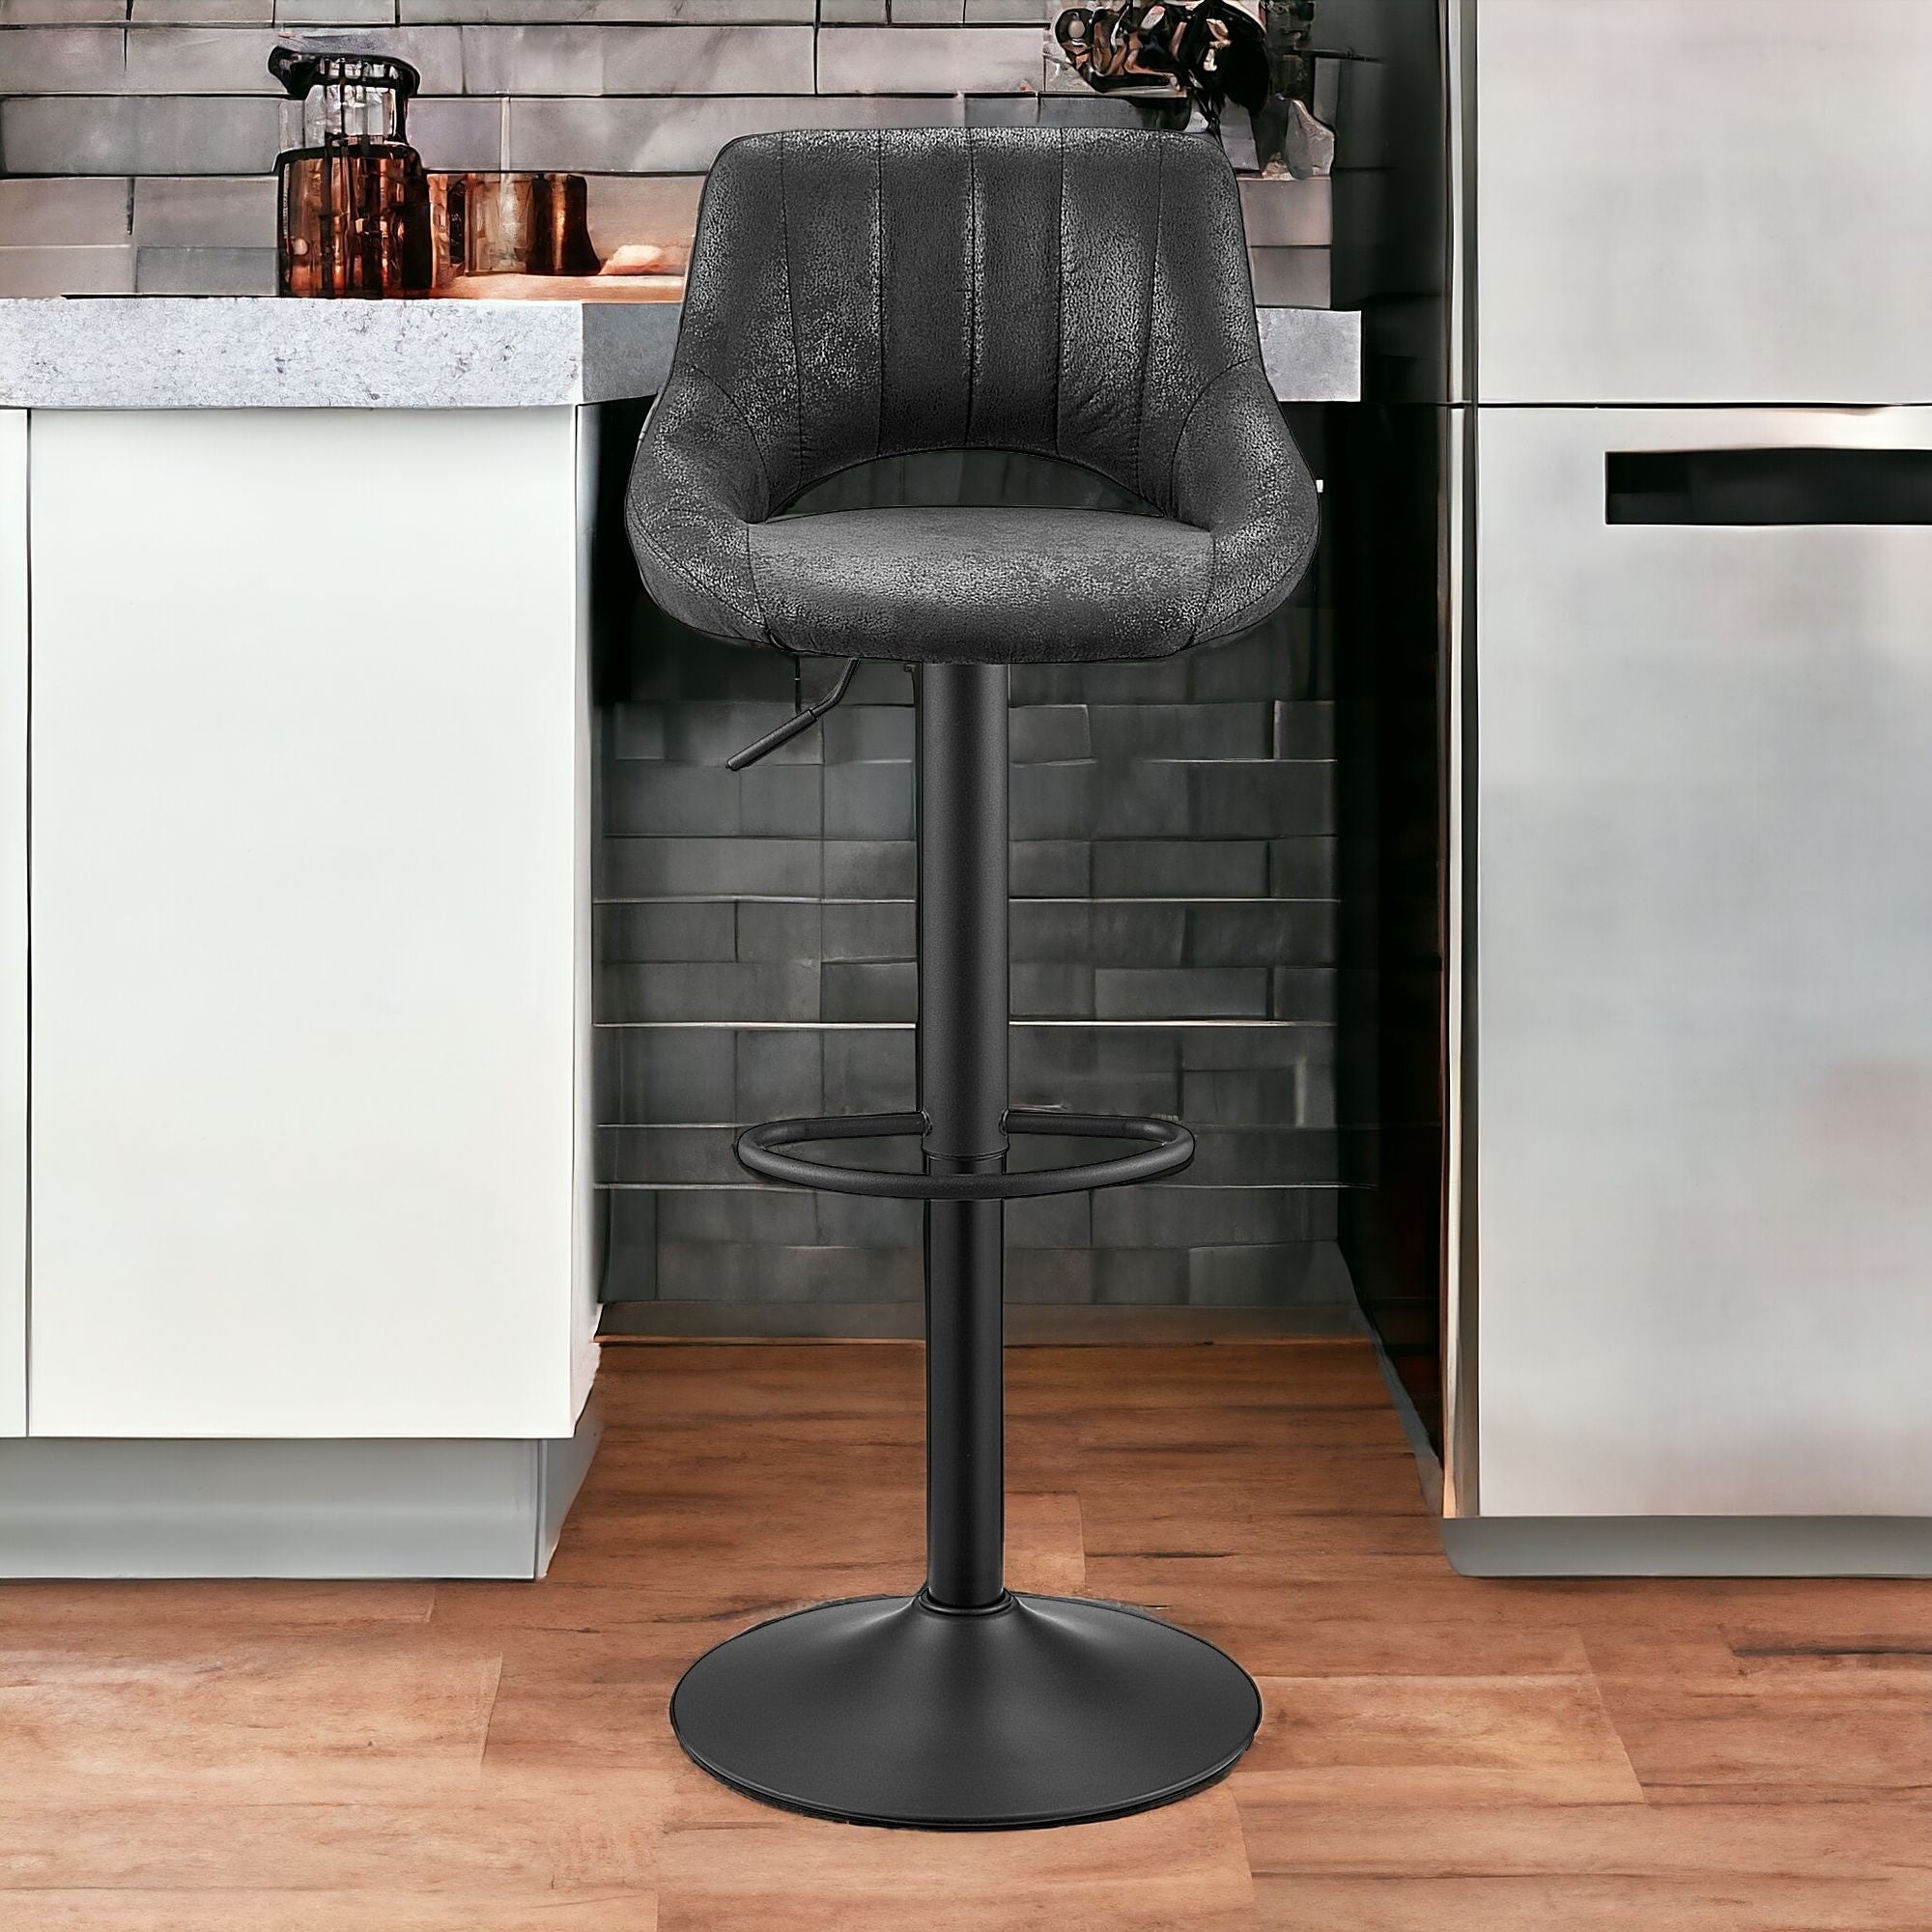 Set of Two 32" Black Faux Leather And Steel Swivel Low Back Adjustable Height Bar Chairs